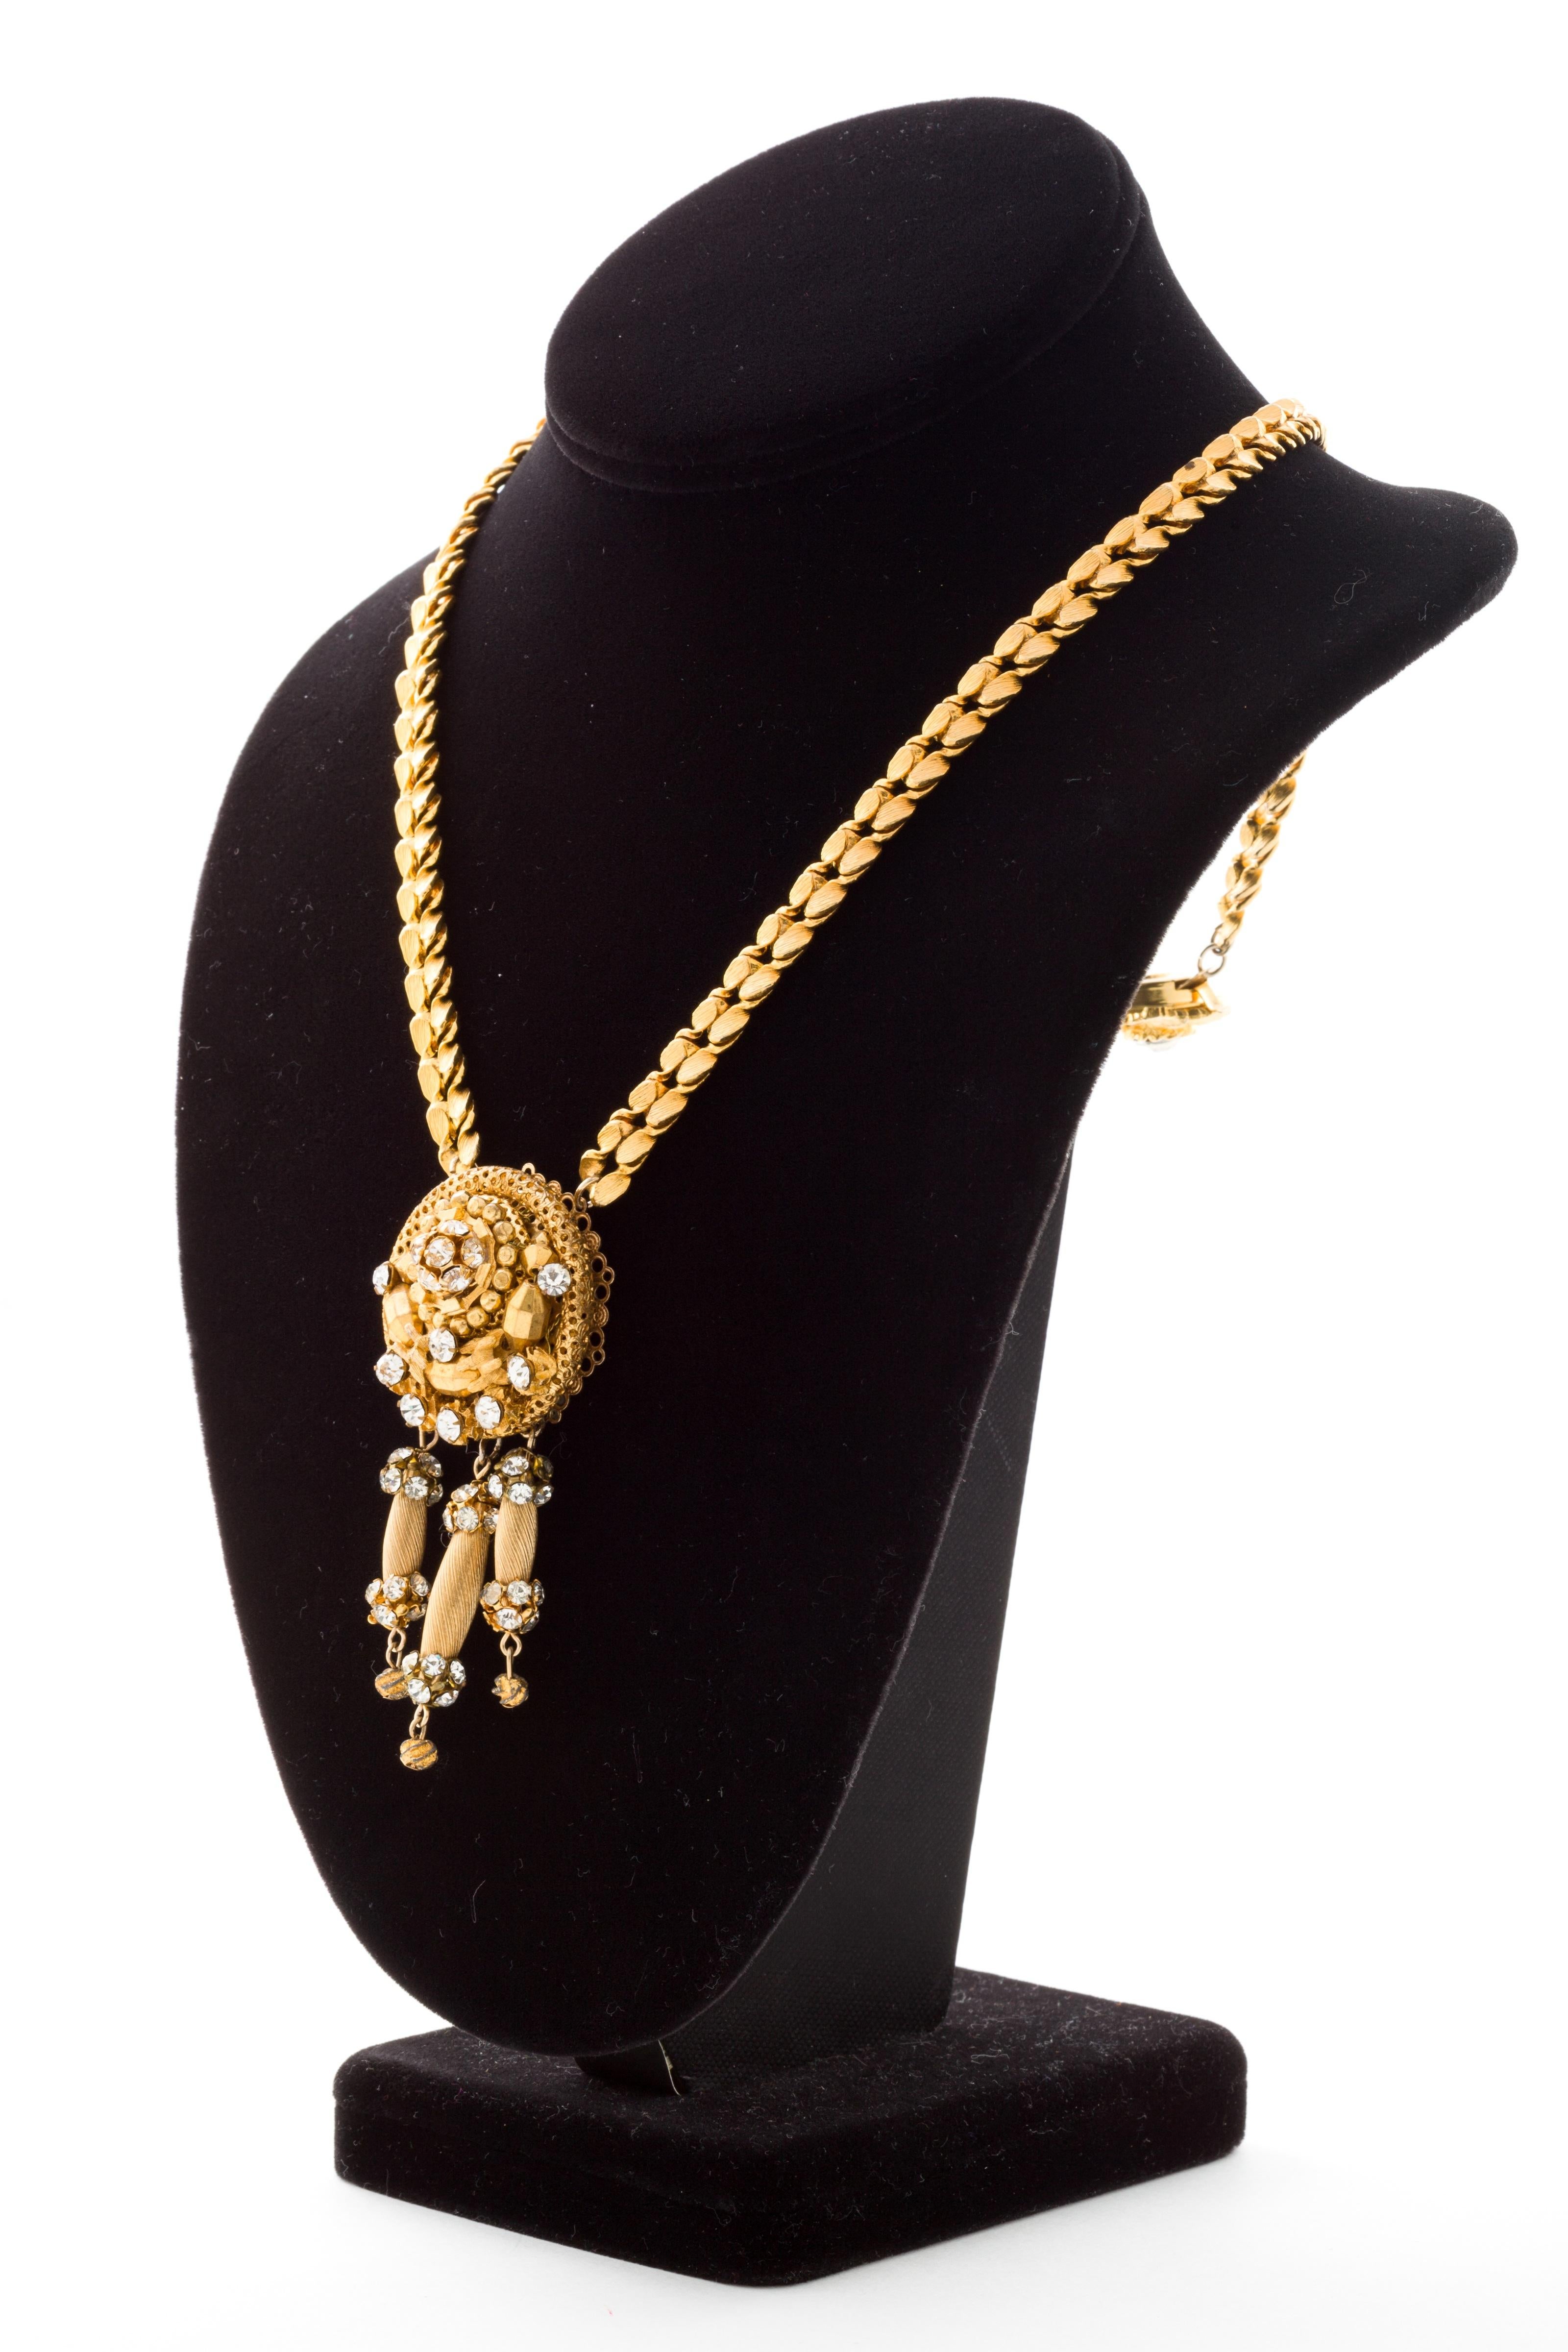 Hattie Carnegie Necklace & Earrings in Gilt Metal with Crystals For Sale 5